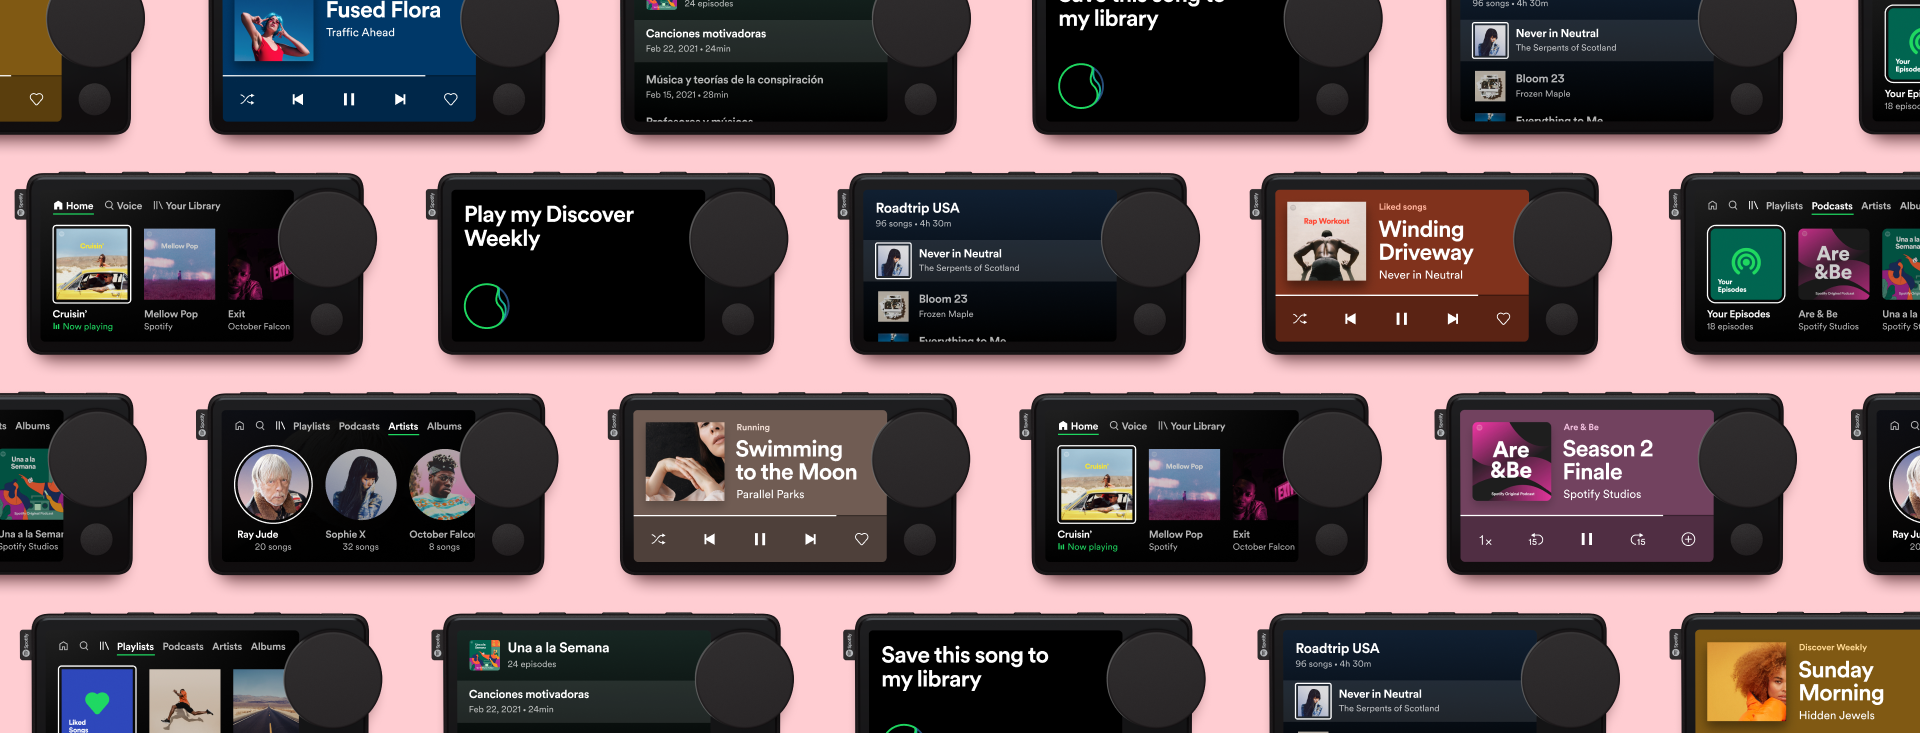 Replicating Spotify's Now Playing UI using Auto Layout - Part 1 / 2